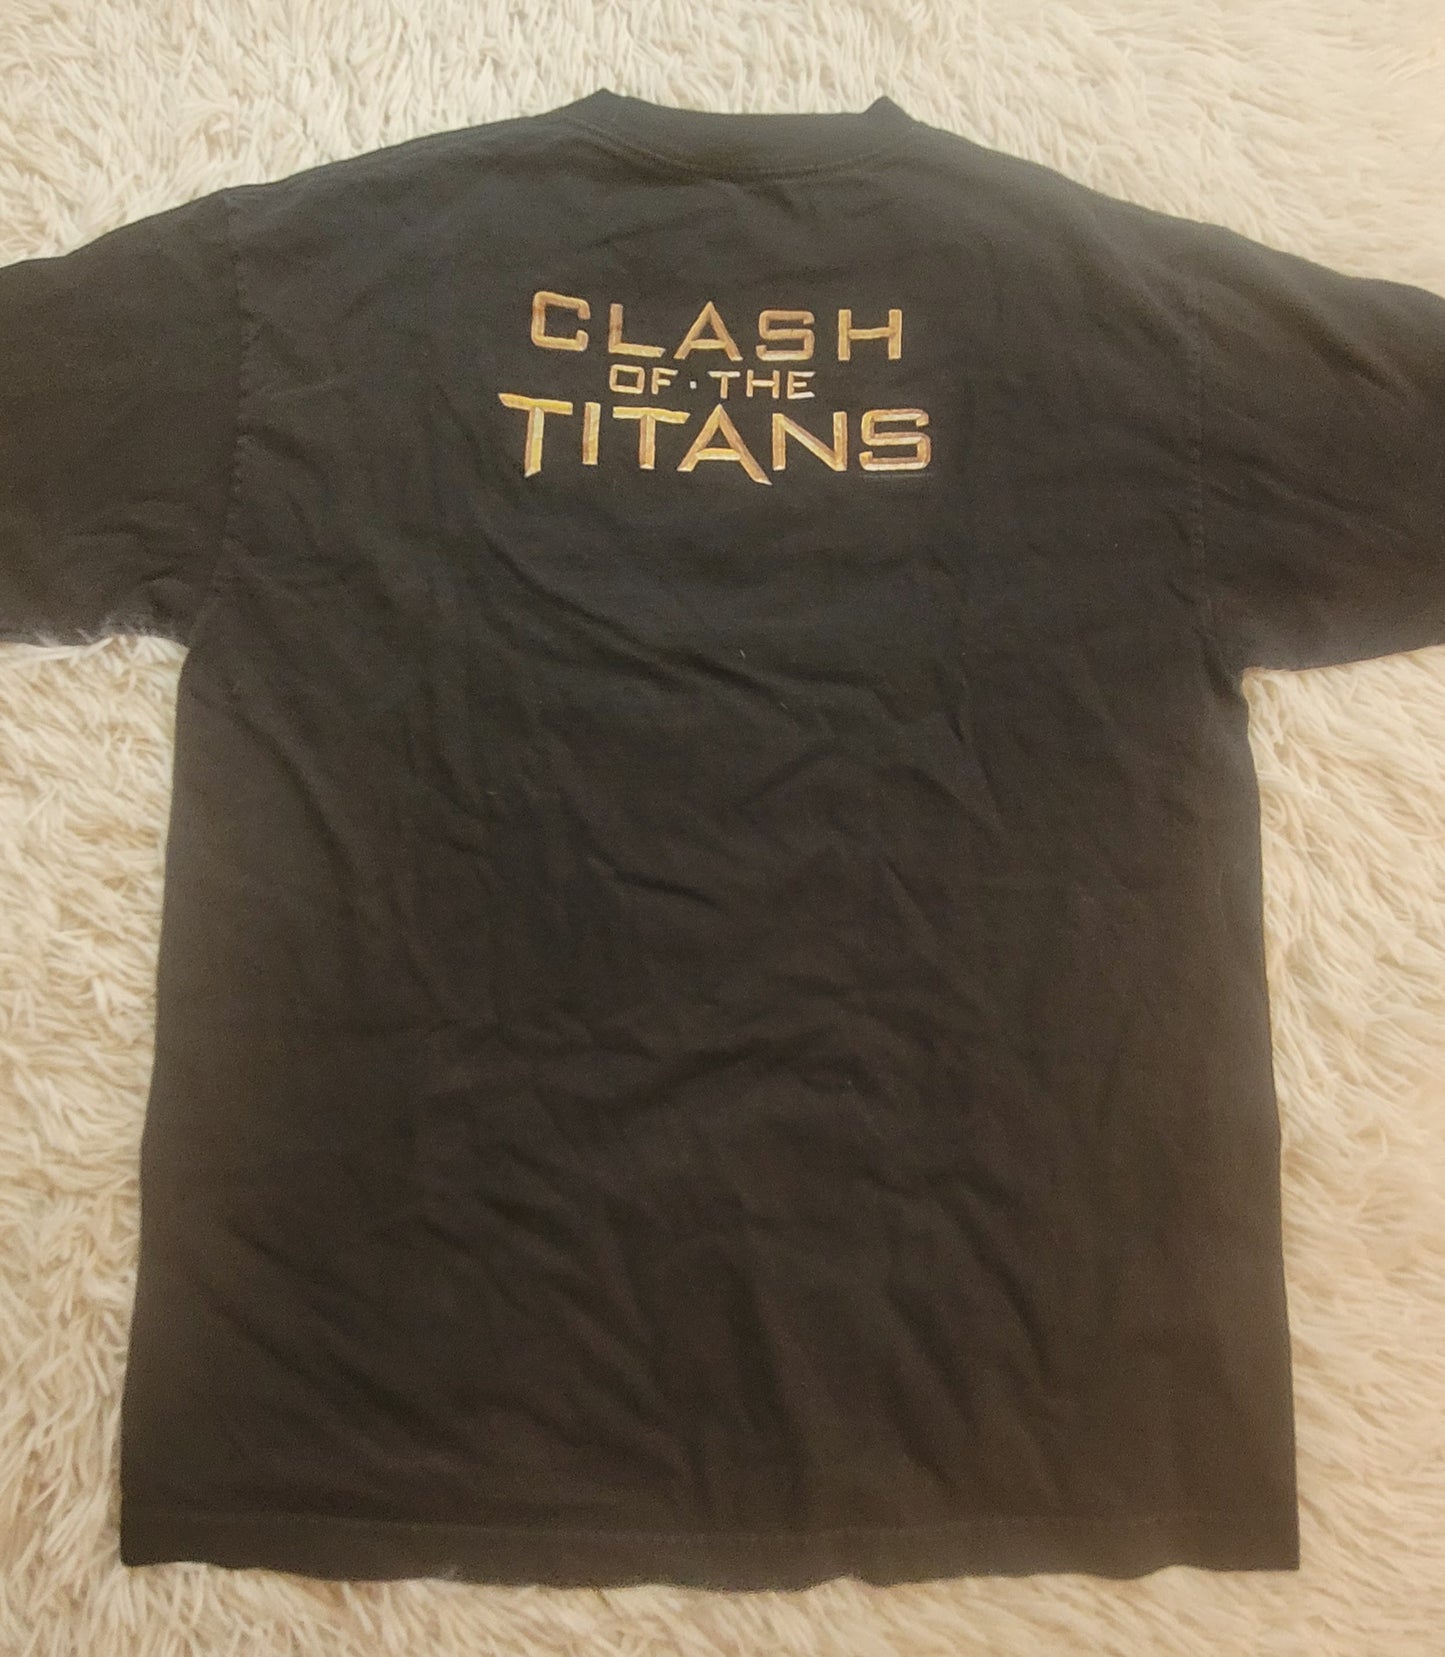 Clash of the Titans Tee - Large